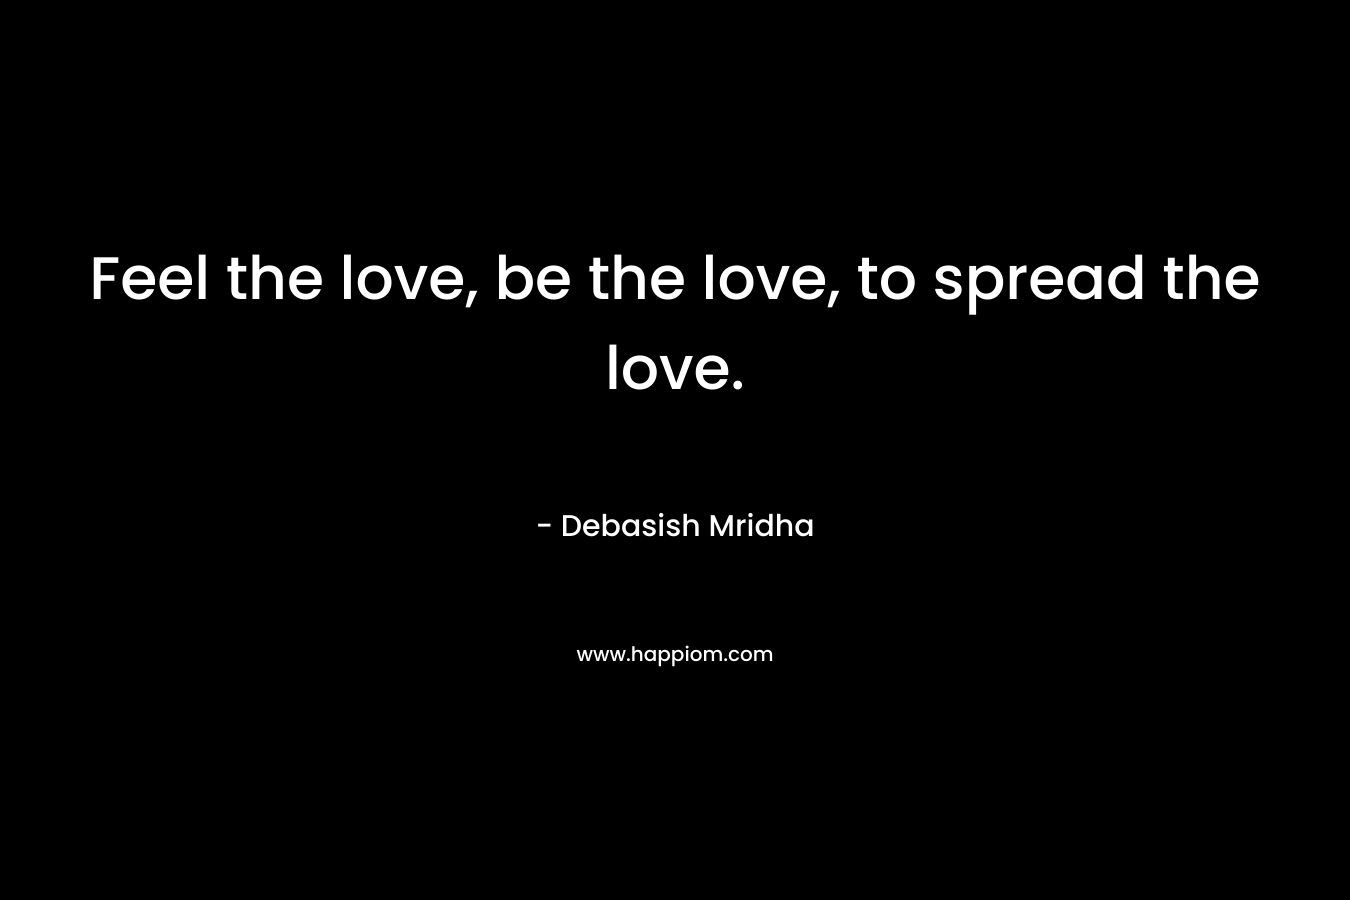 Feel the love, be the love, to spread the love.